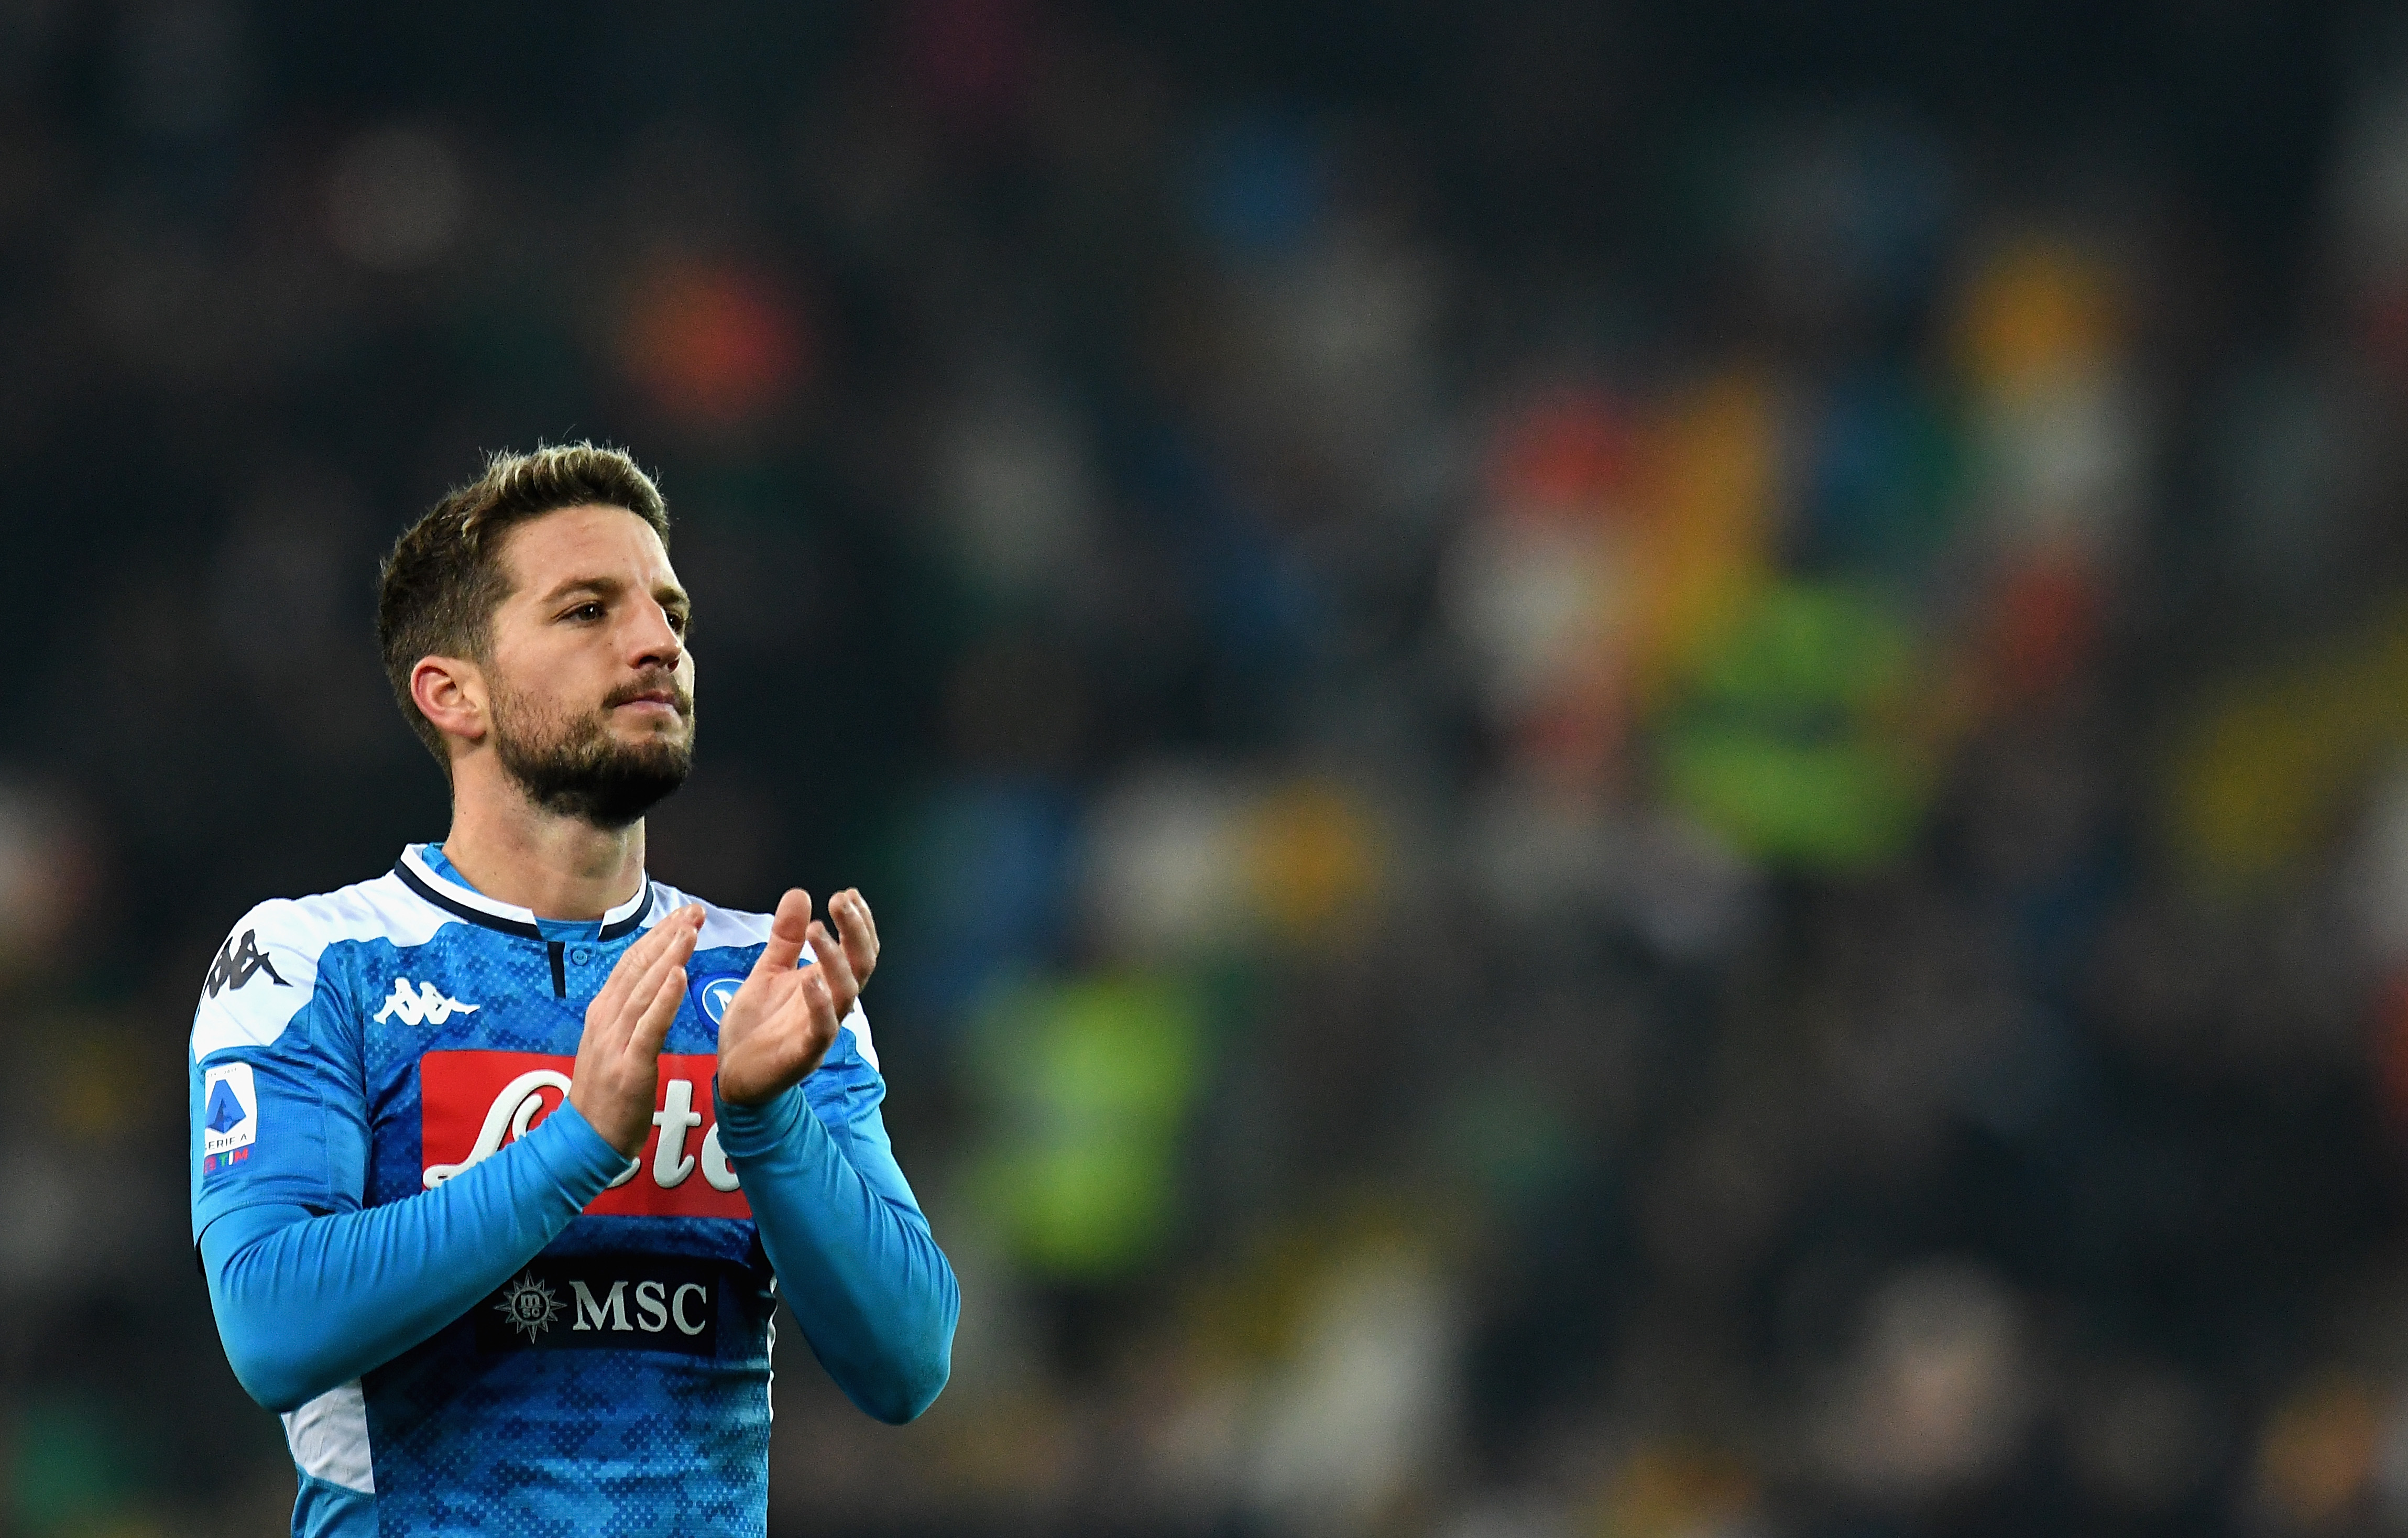 Mertens is suspended for Napoli (Photo by Alessandro Sabattini/Getty Images)